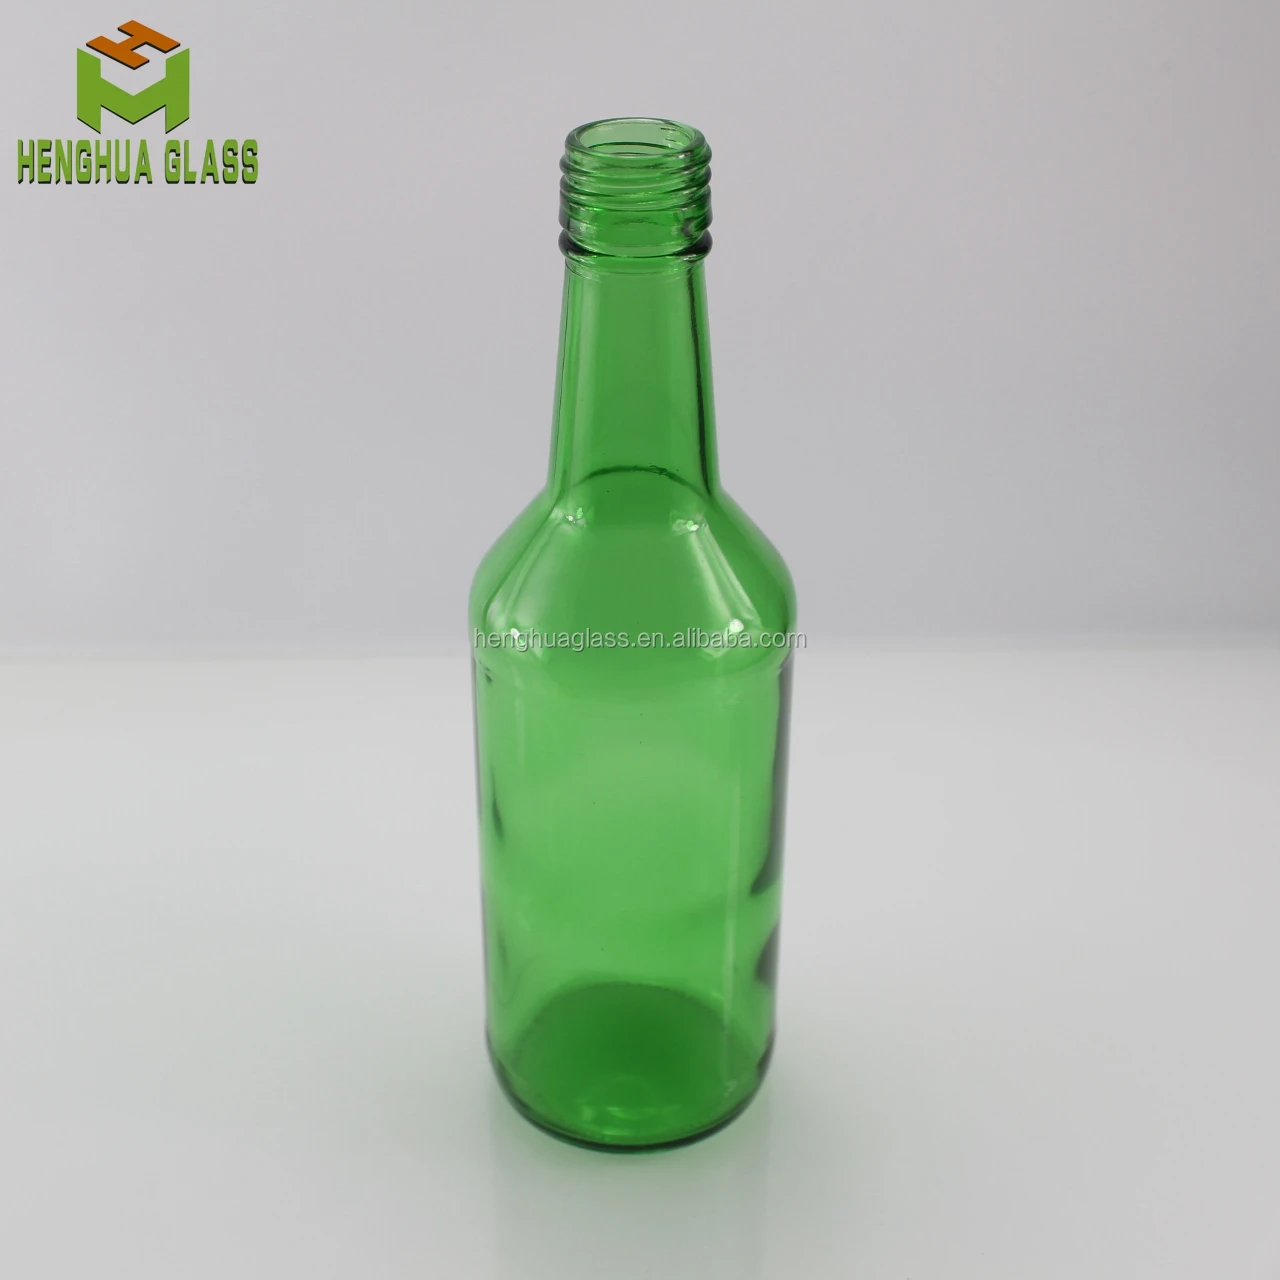 China 360ml Emerald Green Alcohol Bottles Soju Bottle Suppliers &  Manufacturers - Wholesale - CHEER